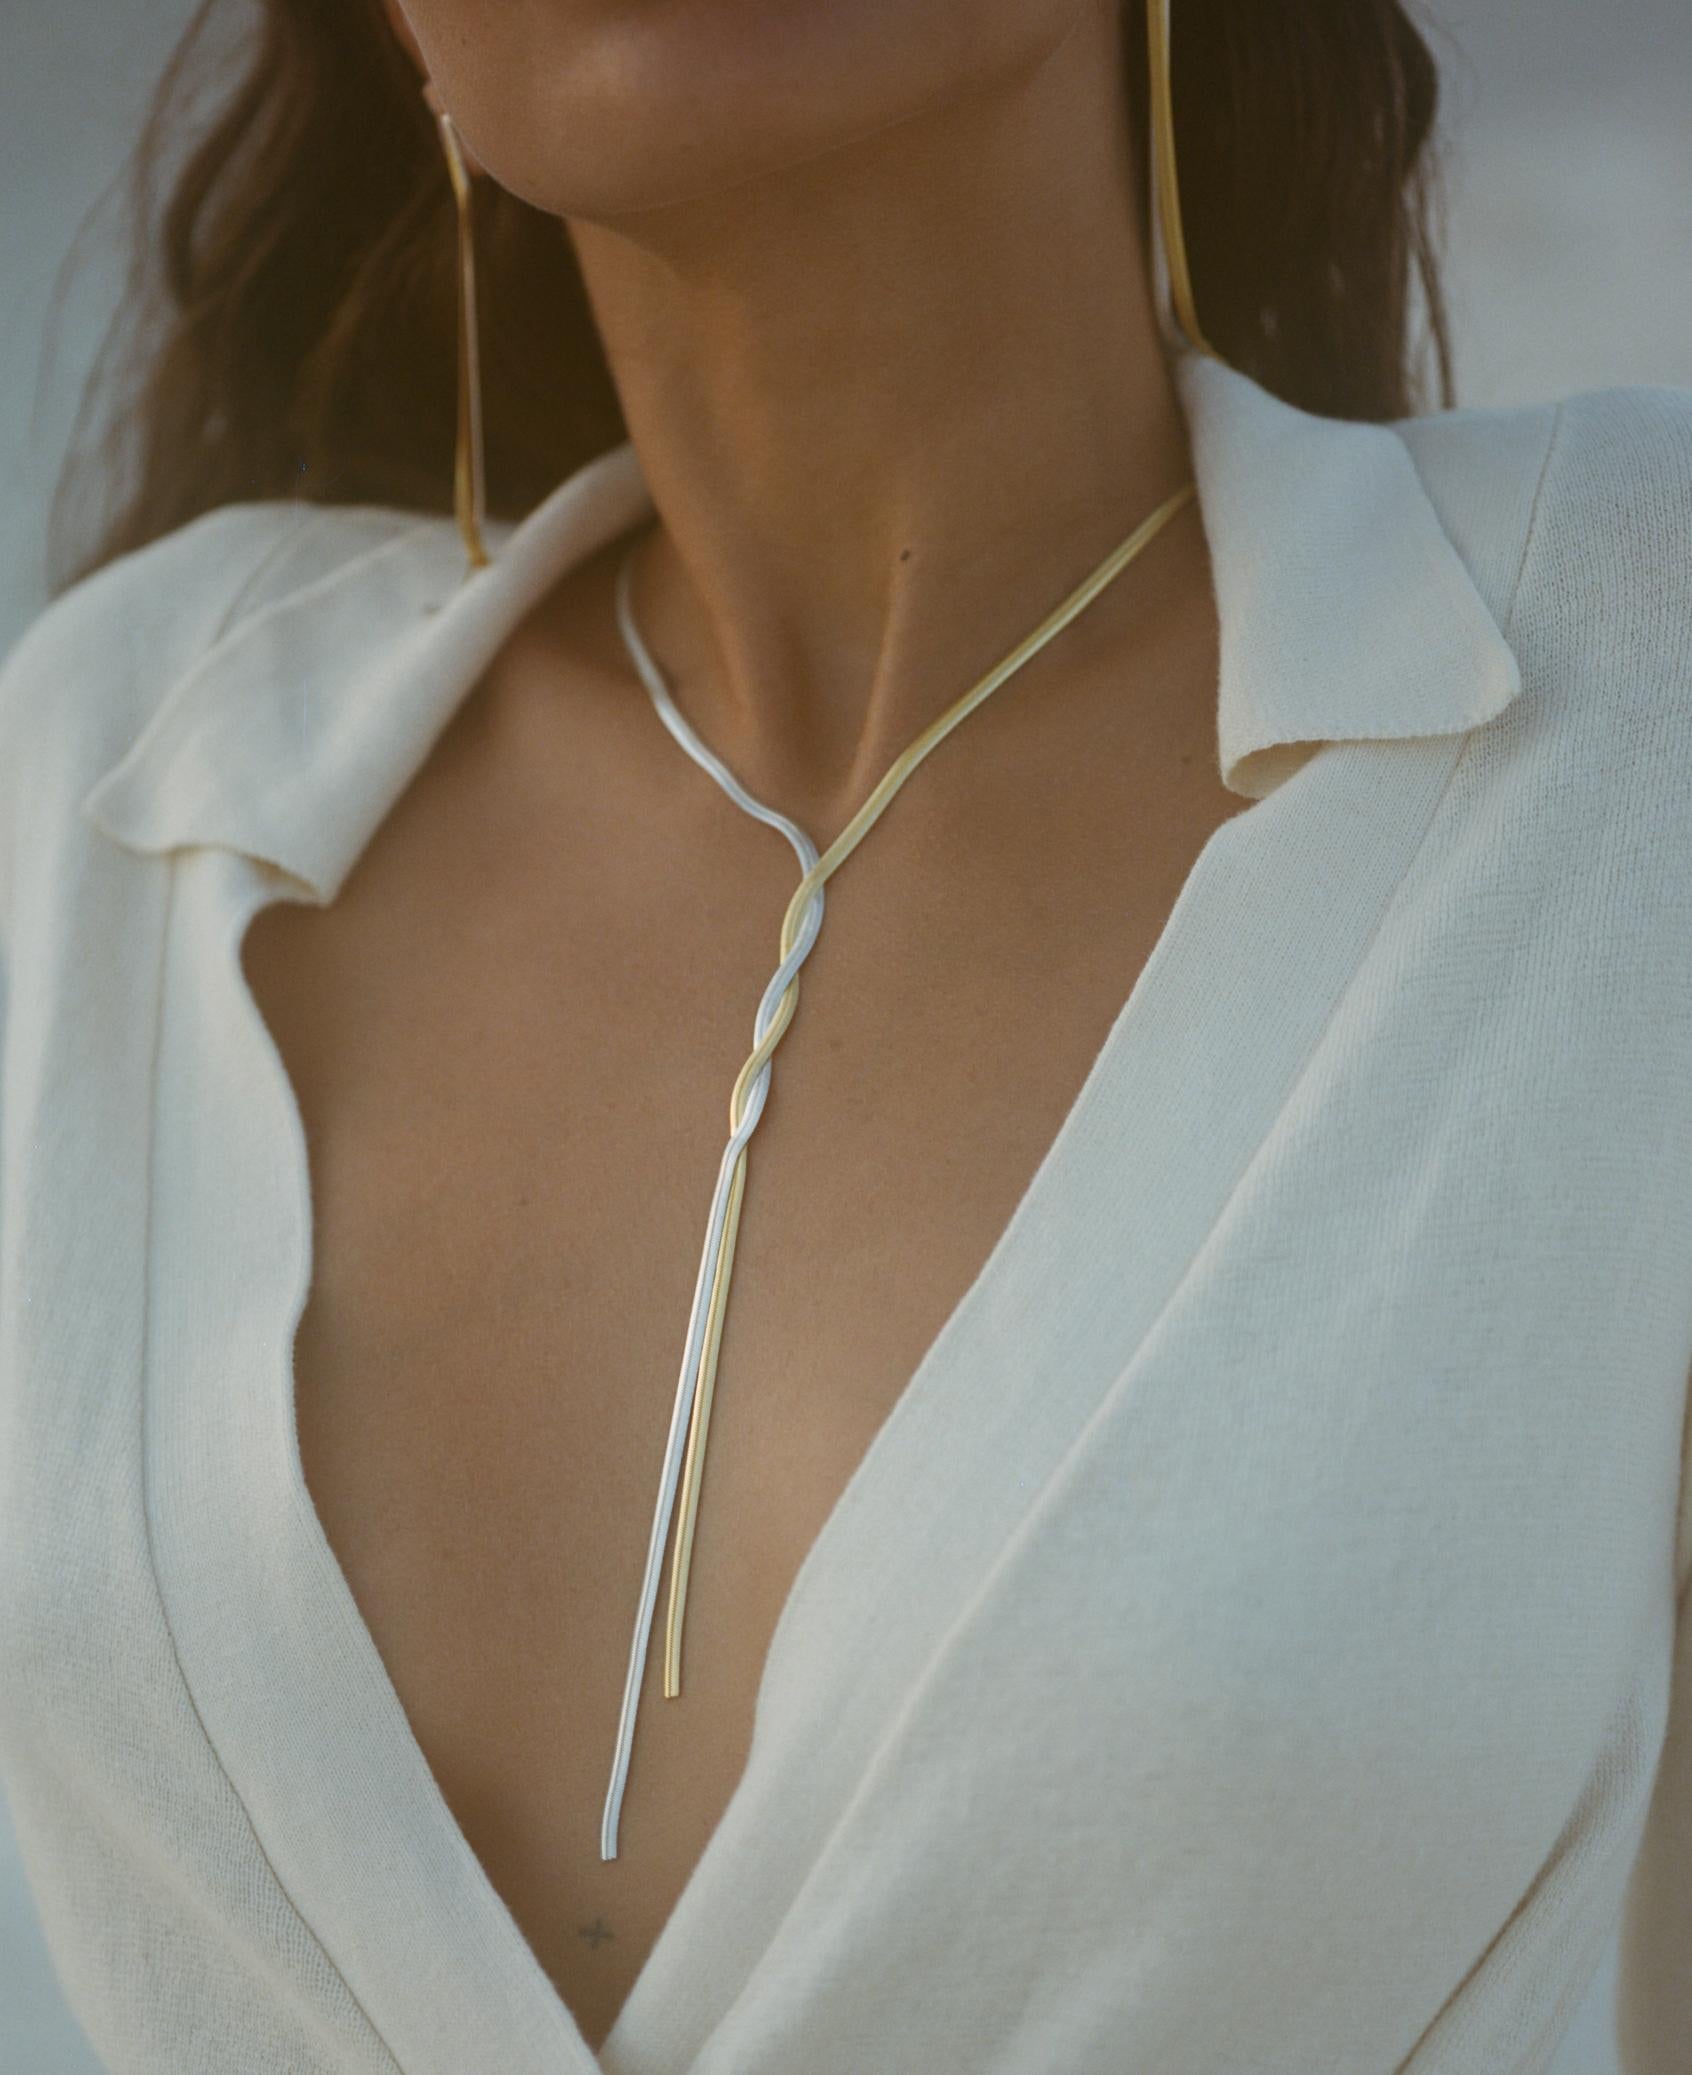 Necklace Silver Lariat Liquid Minimal Snake Chain 18 Karat Gold-Plated Greek In New Condition For Sale In Athens, GR